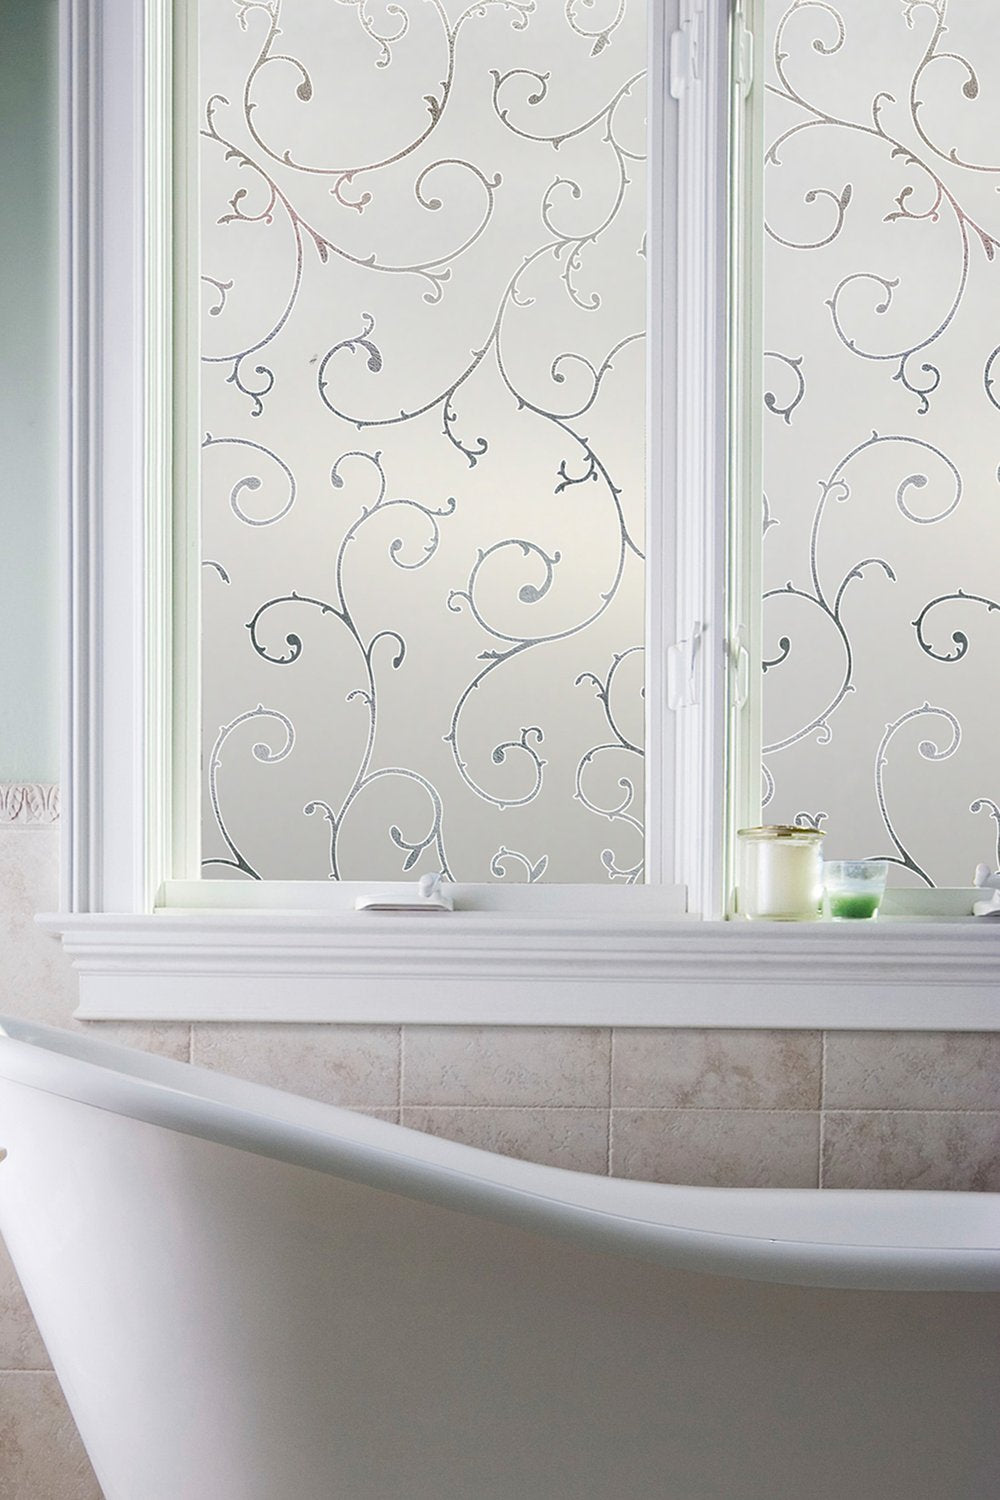 Etched Lace Static Cling Decorative Window Film